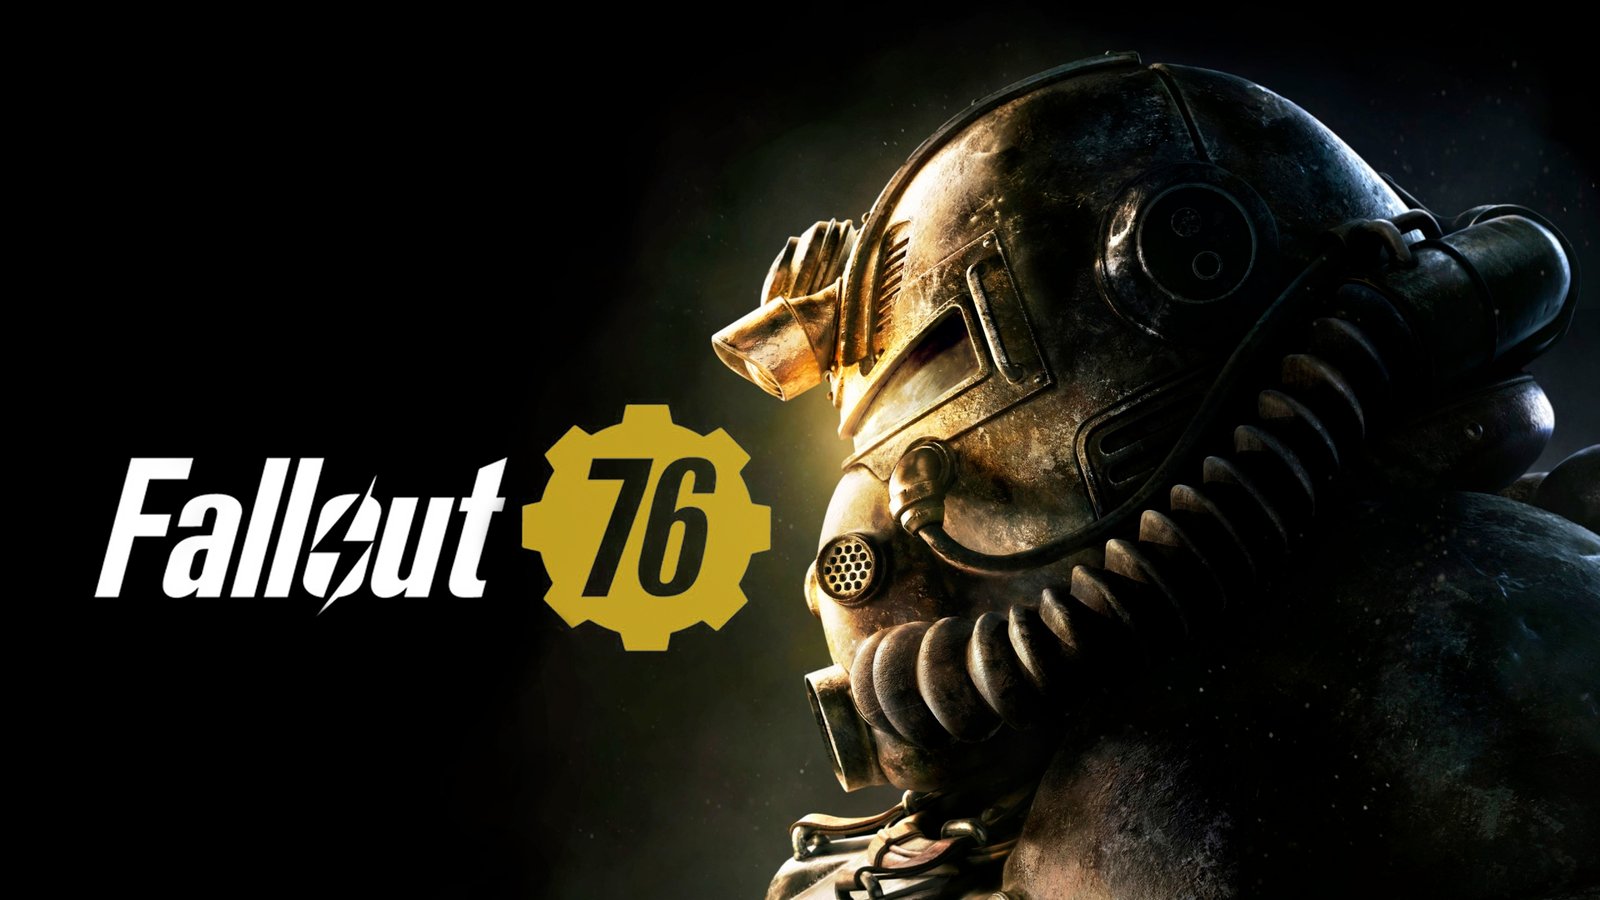 Fallout 76 Game Cover Image